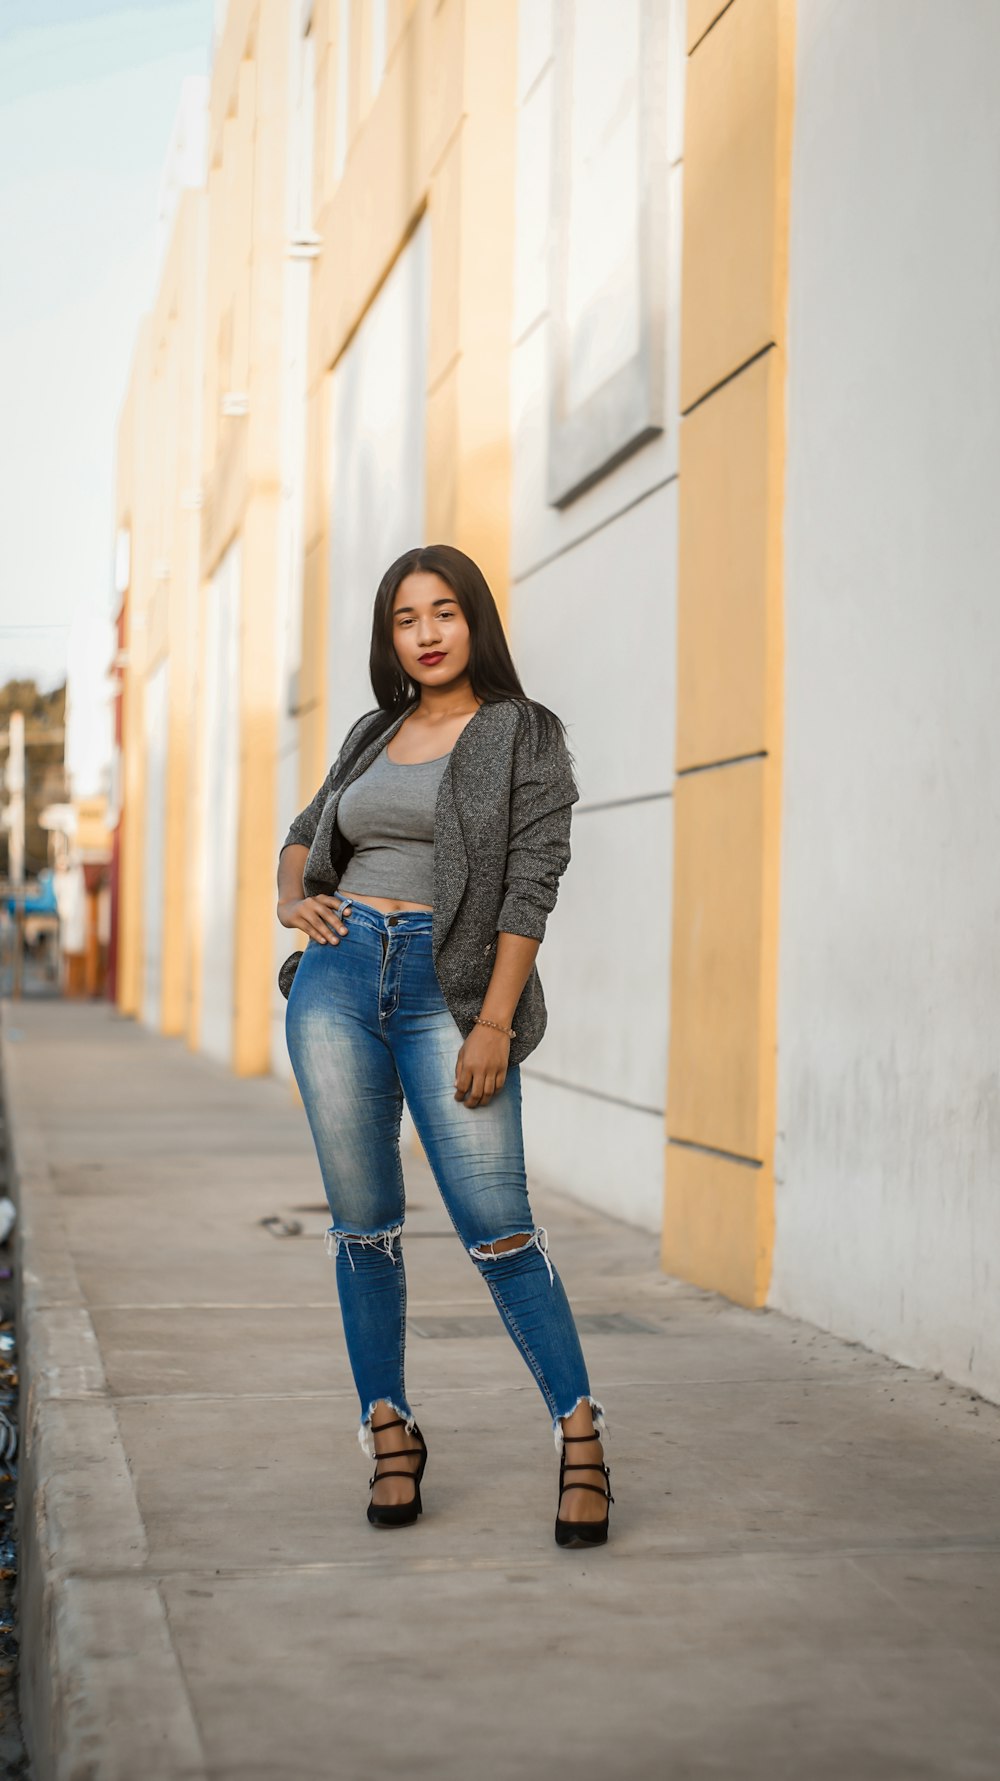 woman in gray long sleeve shirt and blue denim jeans standing on sidewalk during daytime